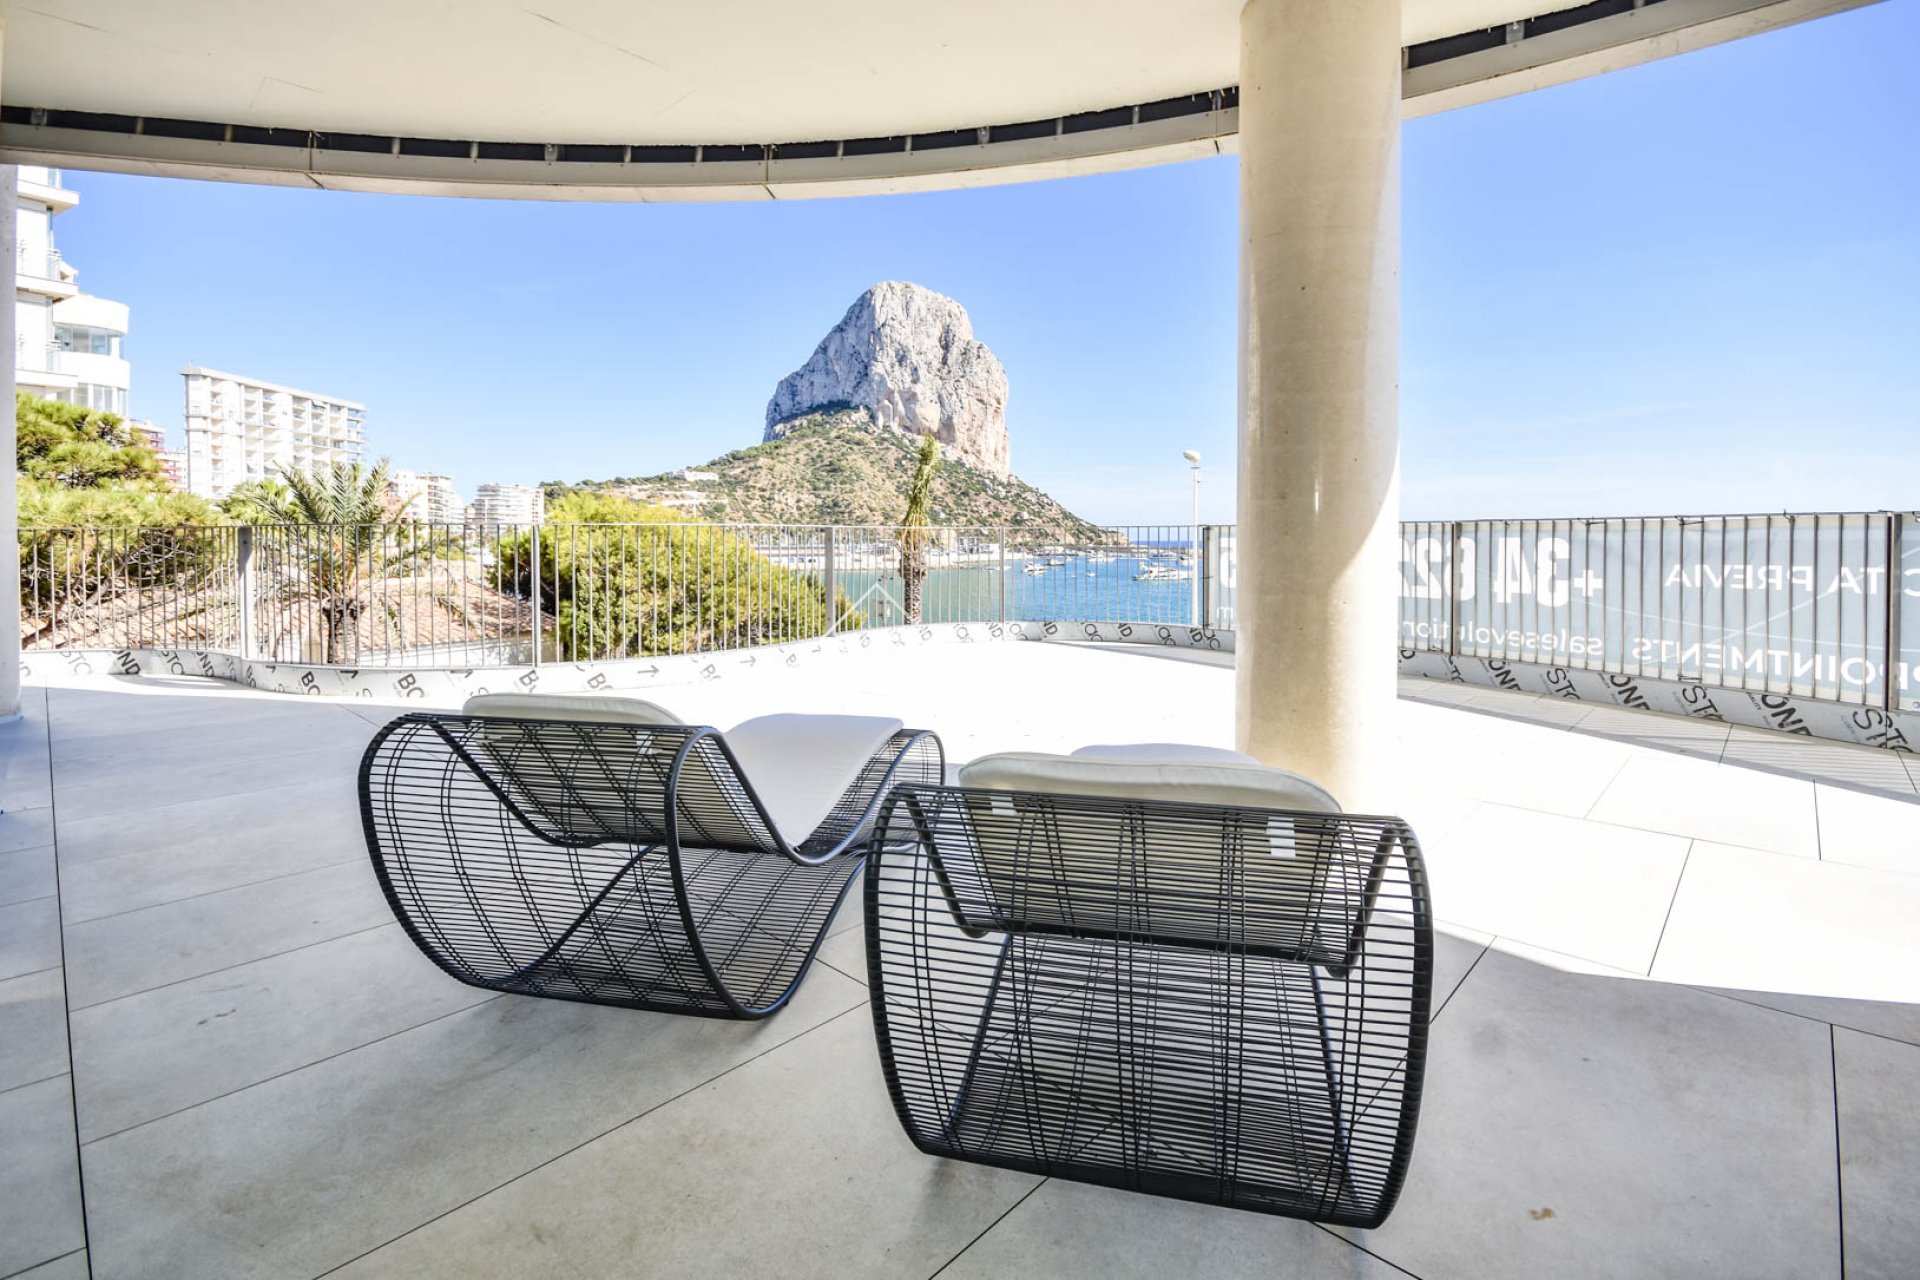 Elegant and innovative apartment complex in Calpe